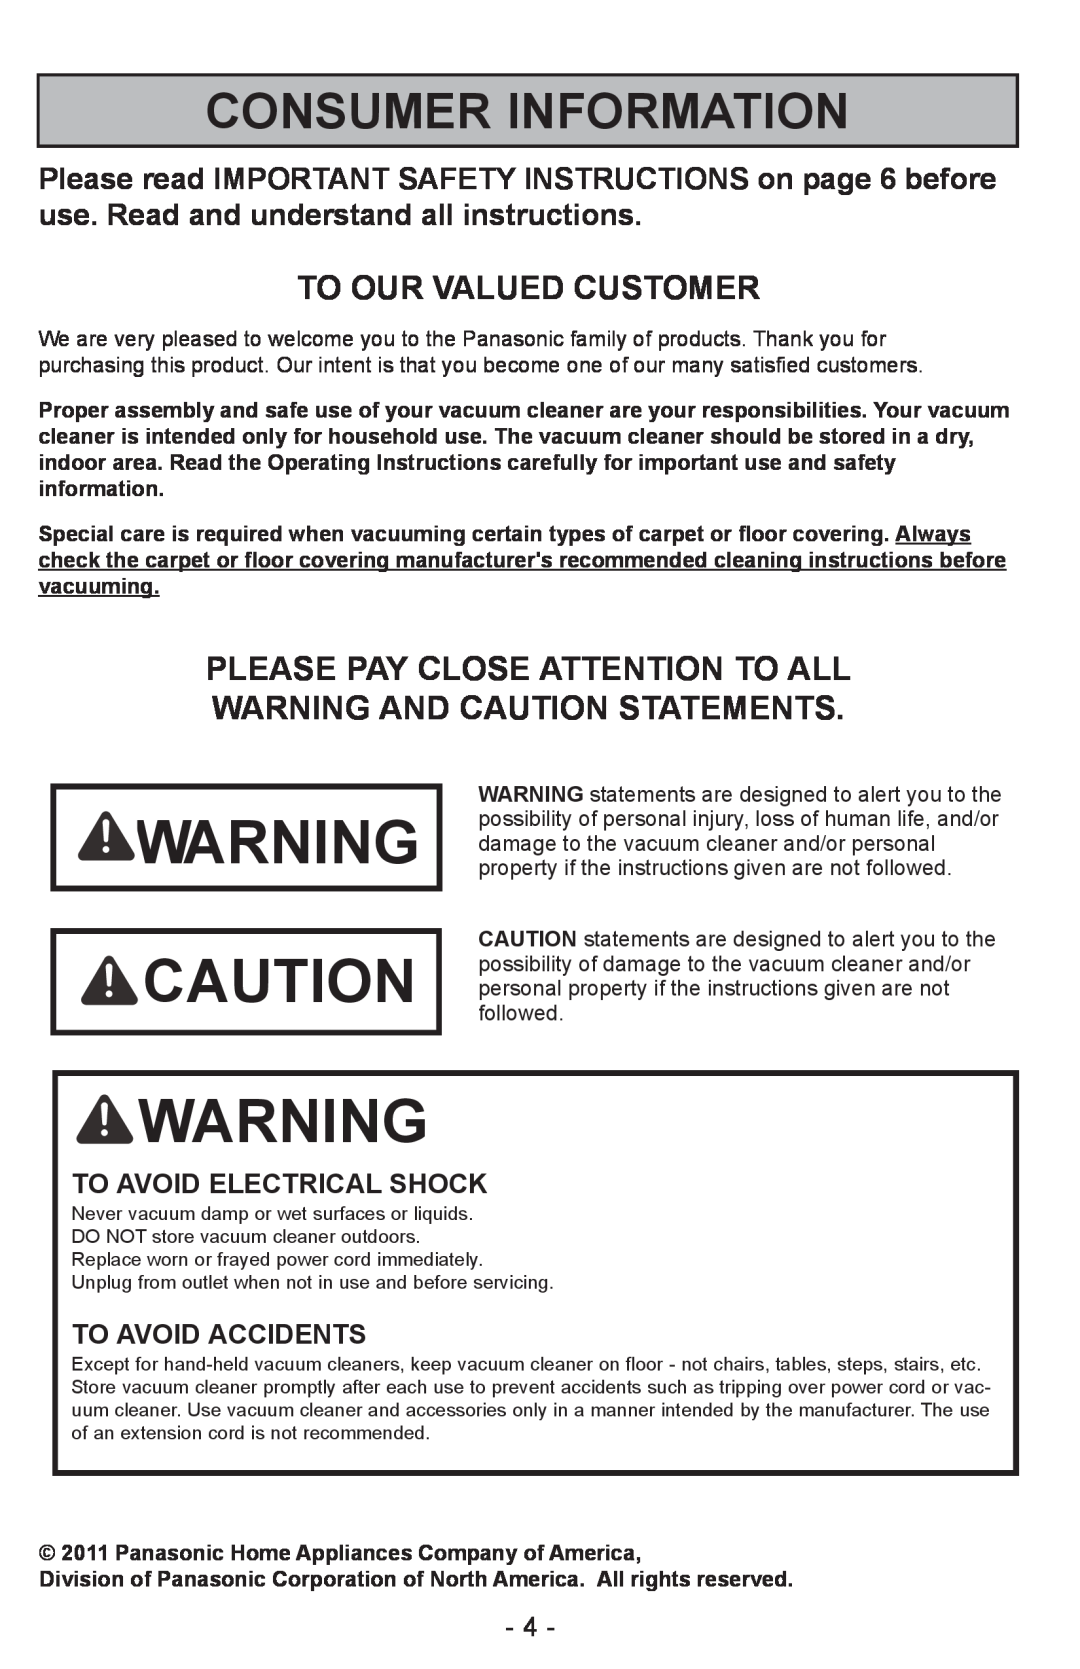 Panasonic MC-CL310 Consumer Information, To Our Valued Customer, Please Pay Close Attention To All, To Avoid Accidents 